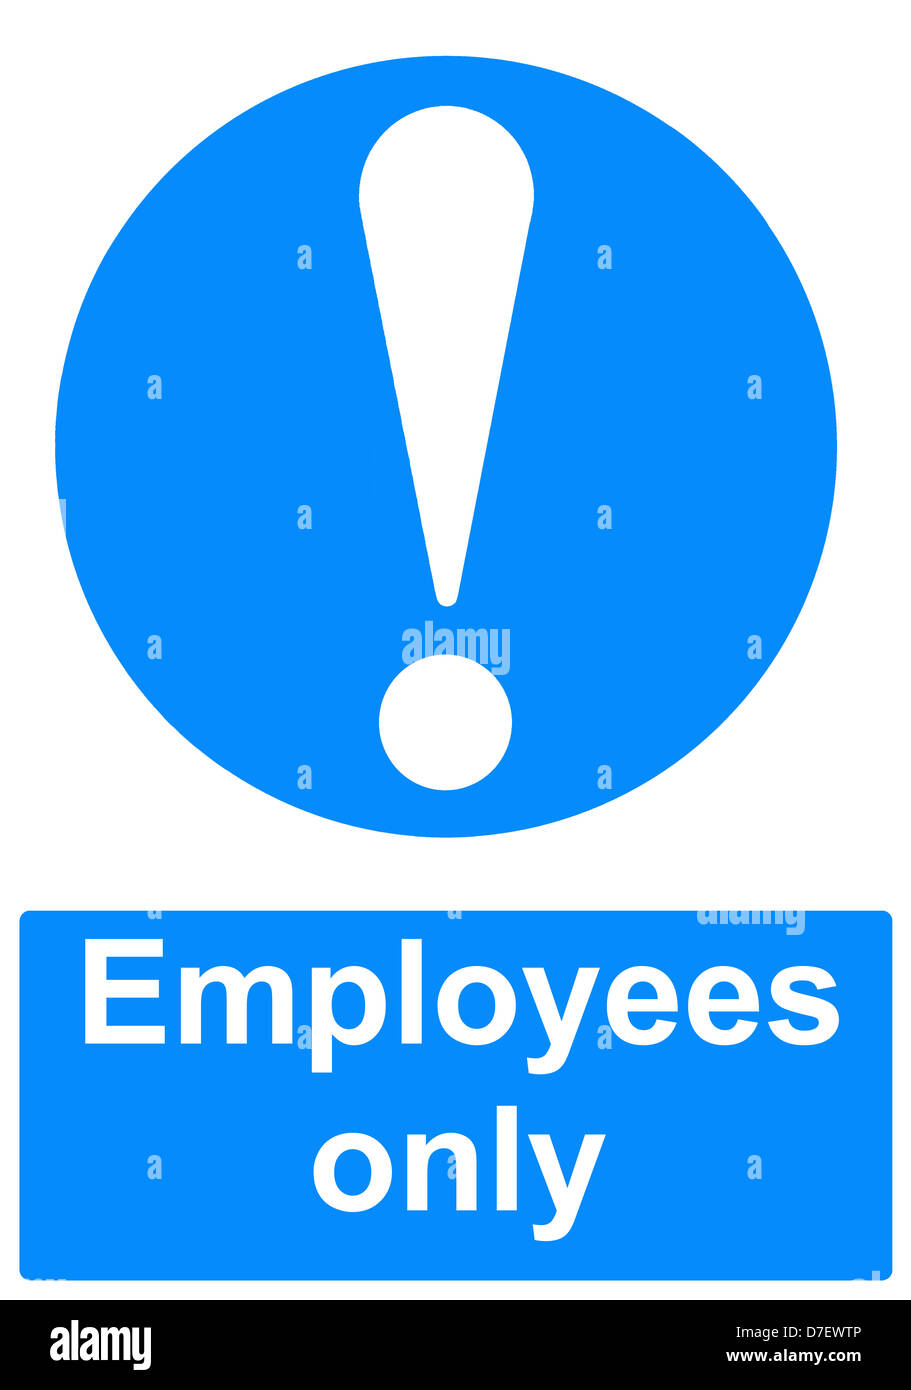 Employees only sign Stock Photo